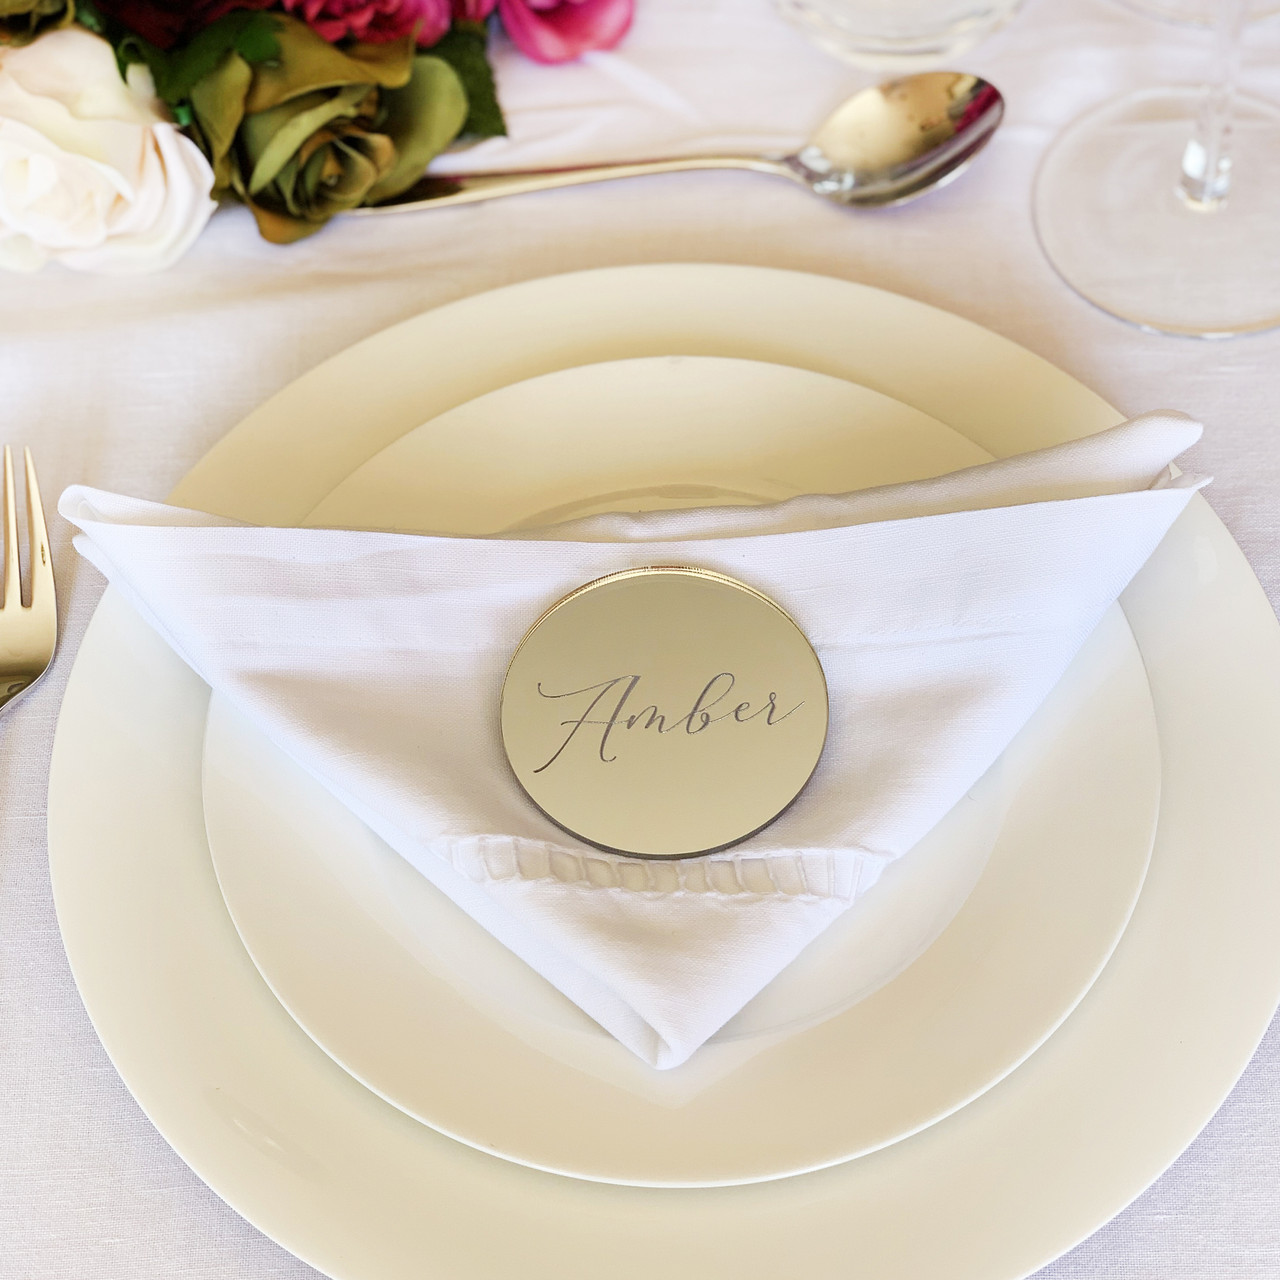 personalised table cards